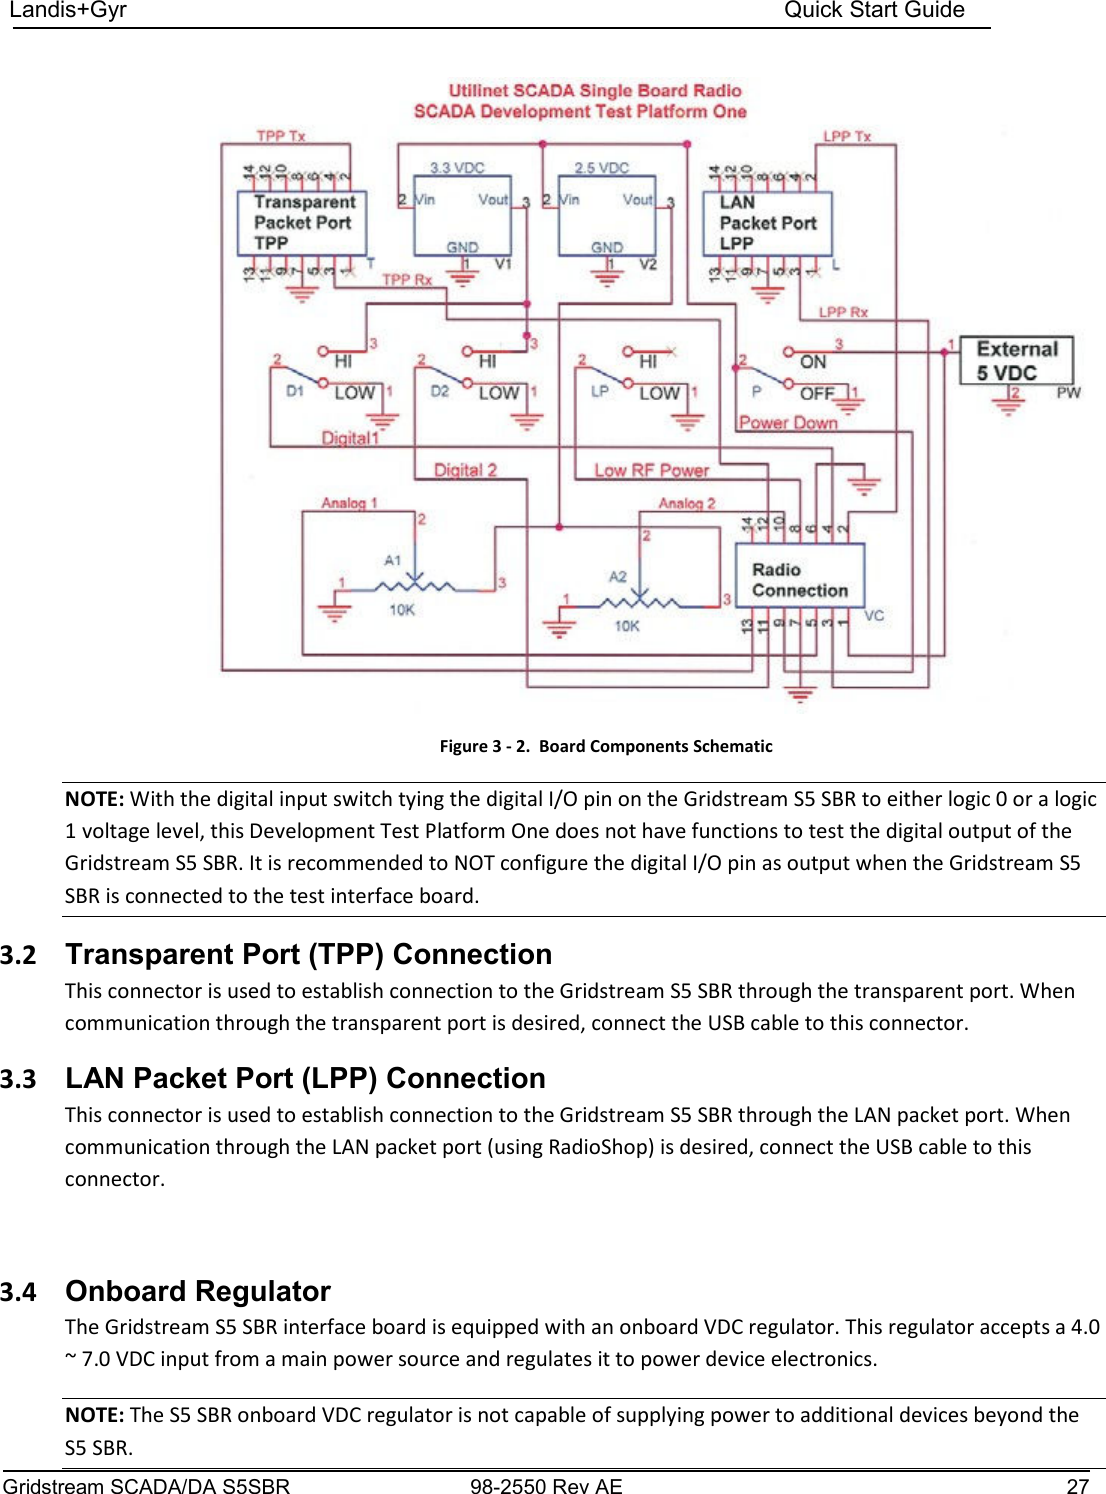 Gridstream SCADA/DA S5SBR 98-2550 Rev AE  27    Landis+Gyr    Quick Start Guide      Figure 3 - 2.  Board Components Schematic NOTE: With the digital input switch tying the digital I/O pin on the Gridstream S5 SBR to either logic 0 or a logic 1 voltage level, this Development Test Platform One does not have functions to test the digital output of the Gridstream S5 SBR. It is recommended to NOT configure the digital I/O pin as output when the Gridstream S5 SBR is connected to the test interface board. 3.2  Transparent Port (TPP) Connection This connector is used to establish connection to the Gridstream S5 SBR through the transparent port. When communication through the transparent port is desired, connect the USB cable to this connector. 3.3  LAN Packet Port (LPP) Connection This connector is used to establish connection to the Gridstream S5 SBR through the LAN packet port. When communication through the LAN packet port (using RadioShop) is desired, connect the USB cable to this connector.  3.4  Onboard Regulator The Gridstream S5 SBR interface board is equipped with an onboard VDC regulator. This regulator accepts a 4.0 ~ 7.0 VDC input from a main power source and regulates it to power device electronics. NOTE: The S5 SBR onboard VDC regulator is not capable of supplying power to additional devices beyond the S5 SBR. 